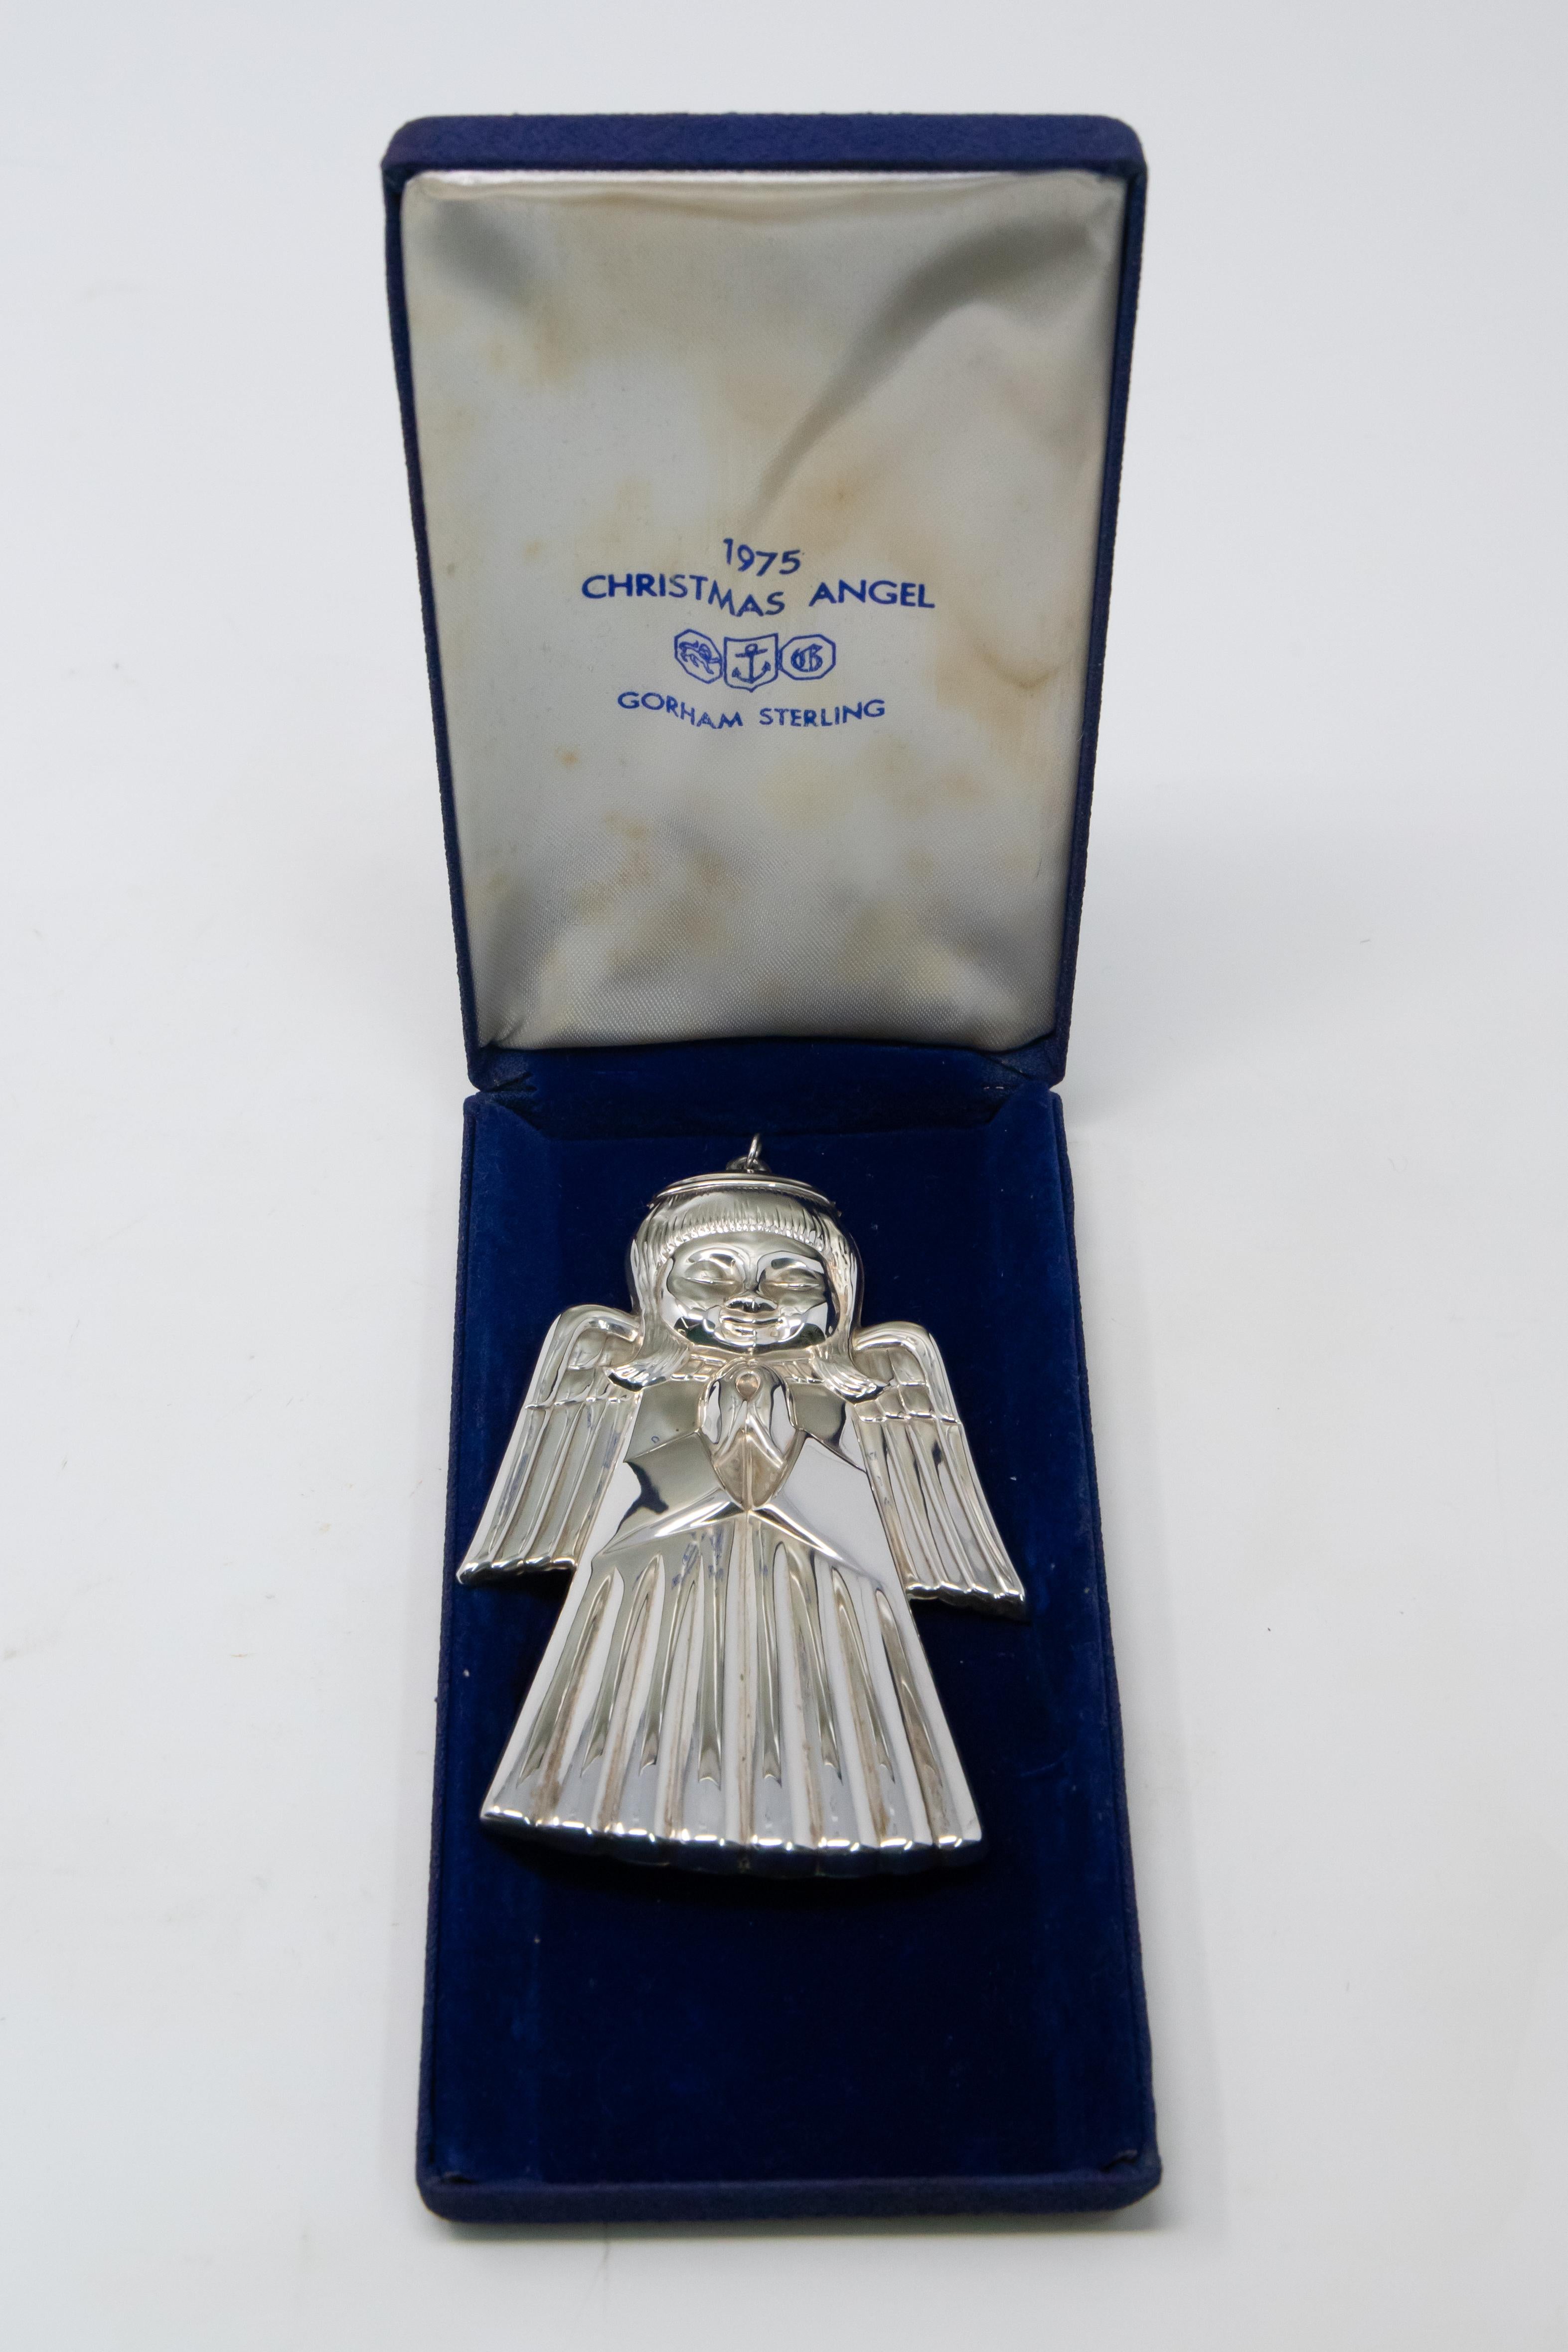 Offering this Limited Edition 1975 Gorham sterling silver Angel ornament. She comes with original box. The beautiful simple lines make her classic. The back is inscribed with Gorham Sterling, Limited Edition, 549 of 9800.